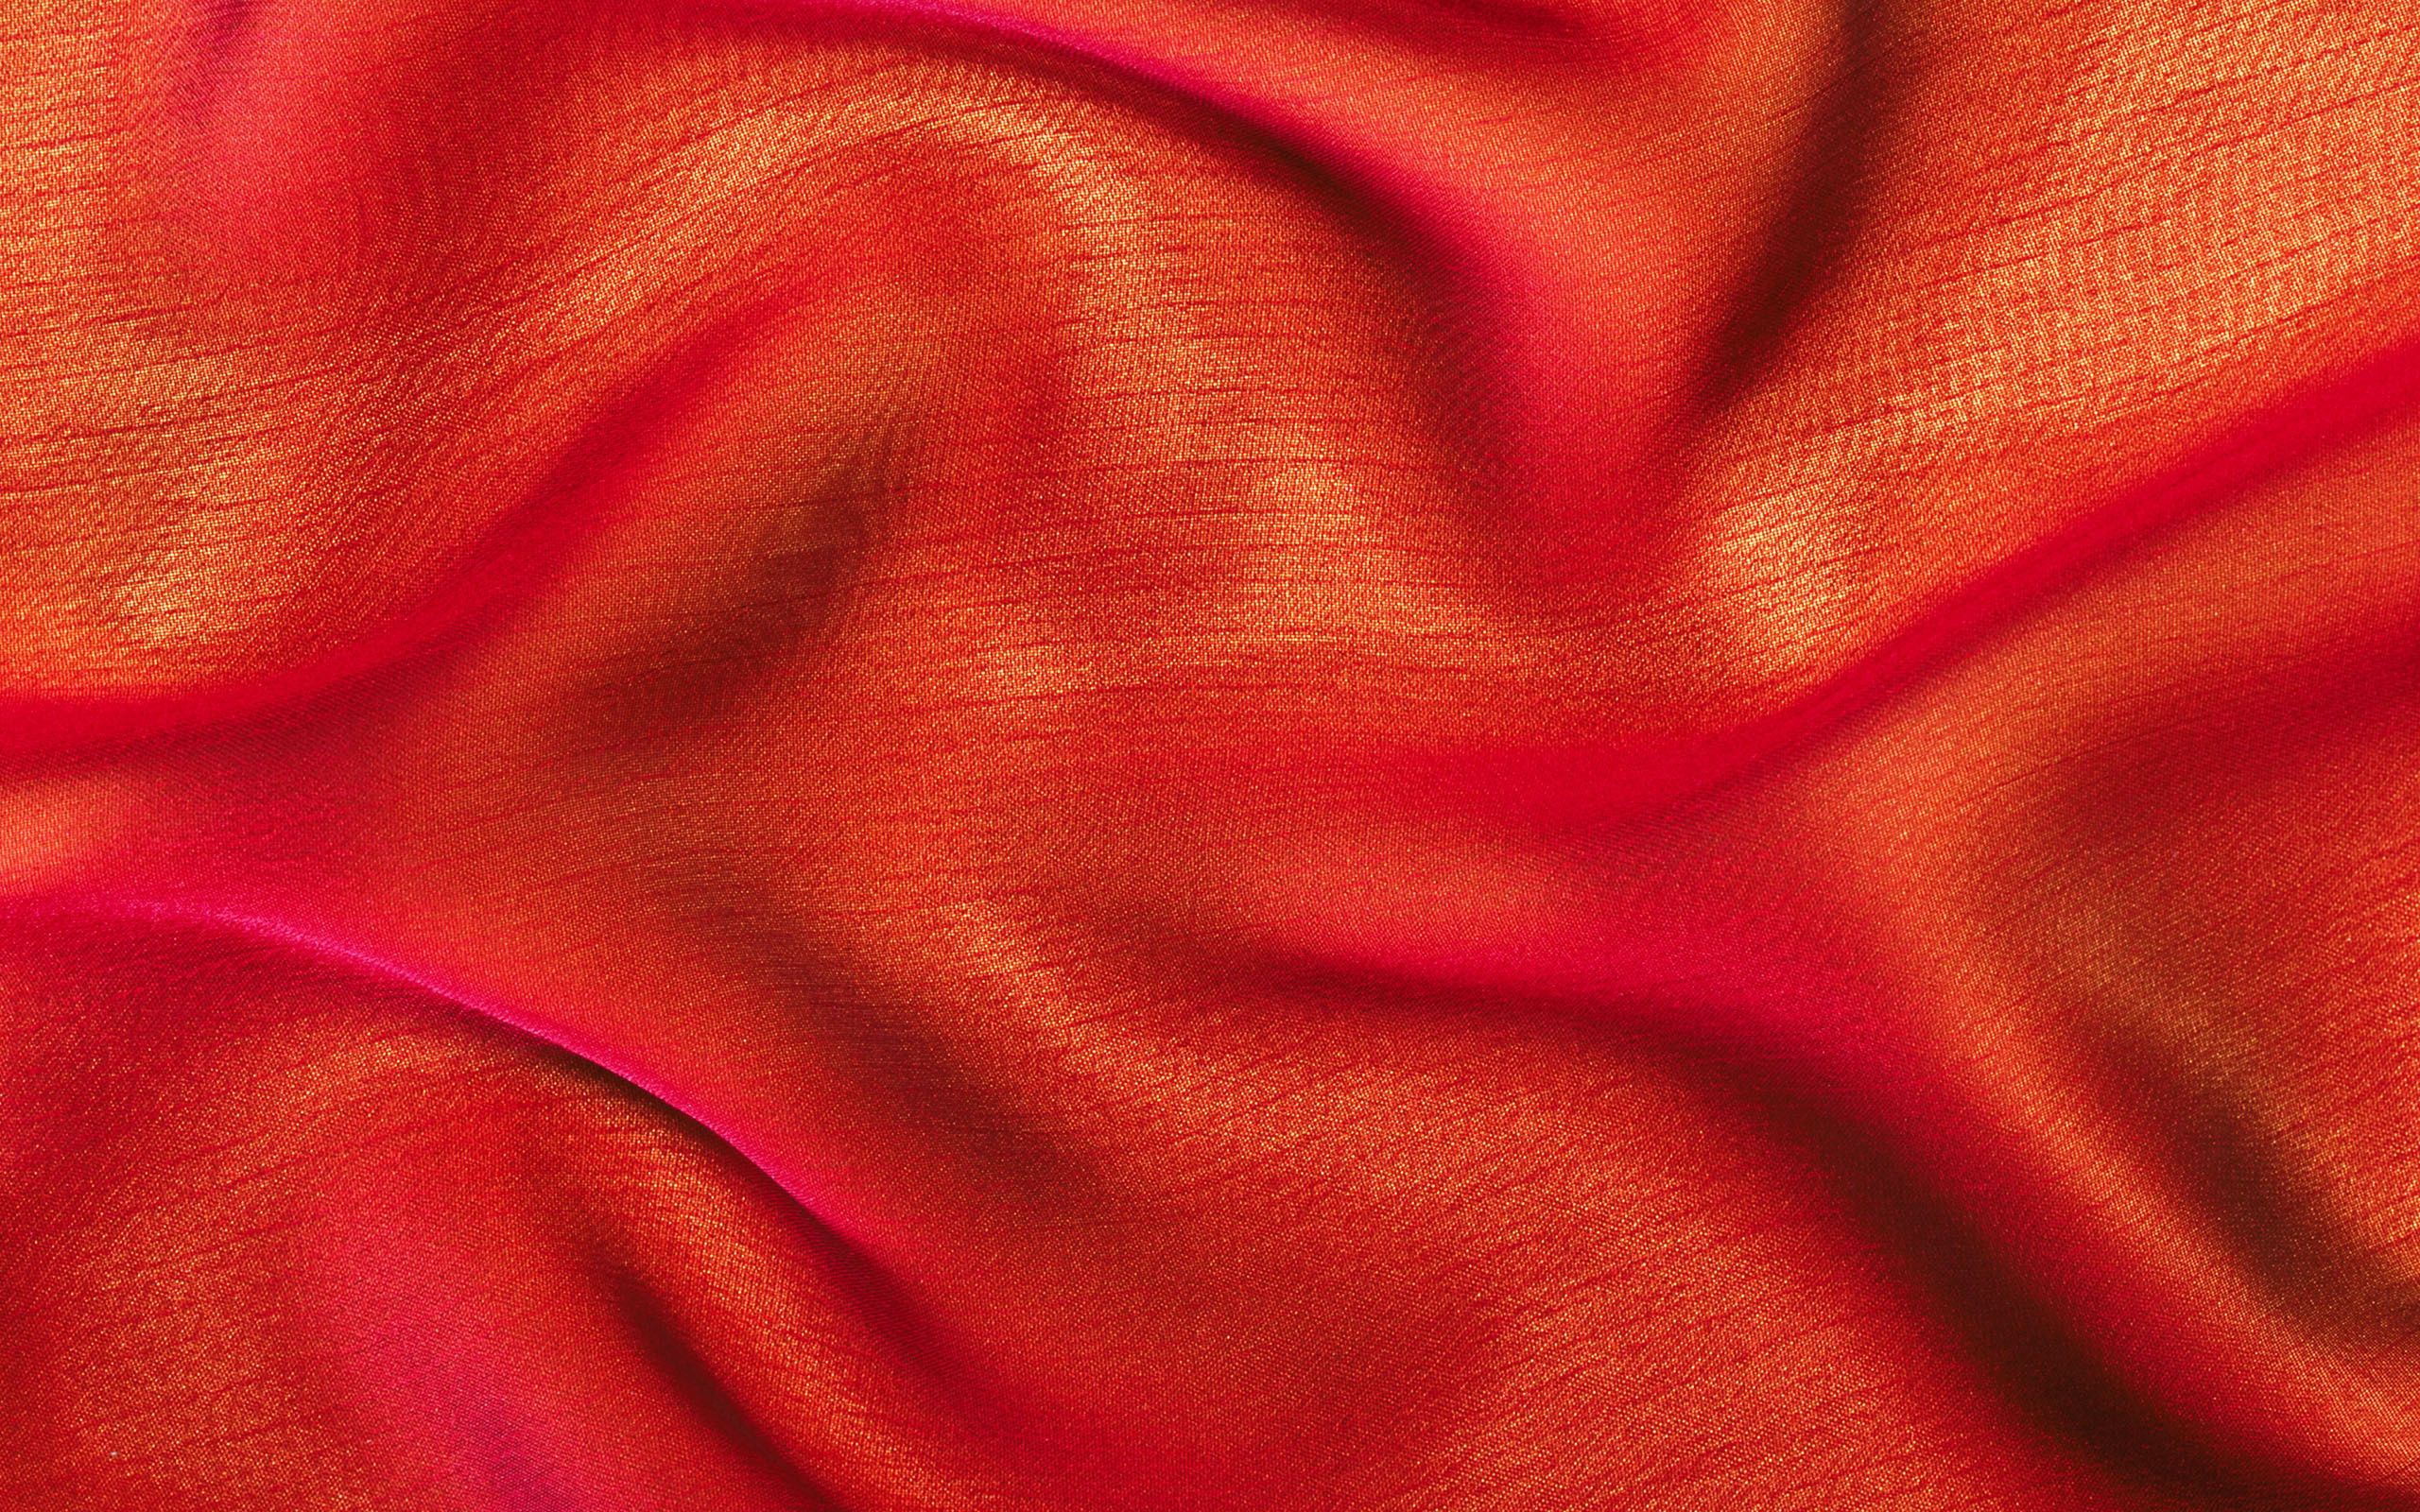 android textures, texture, cloth, wavy, material, walked